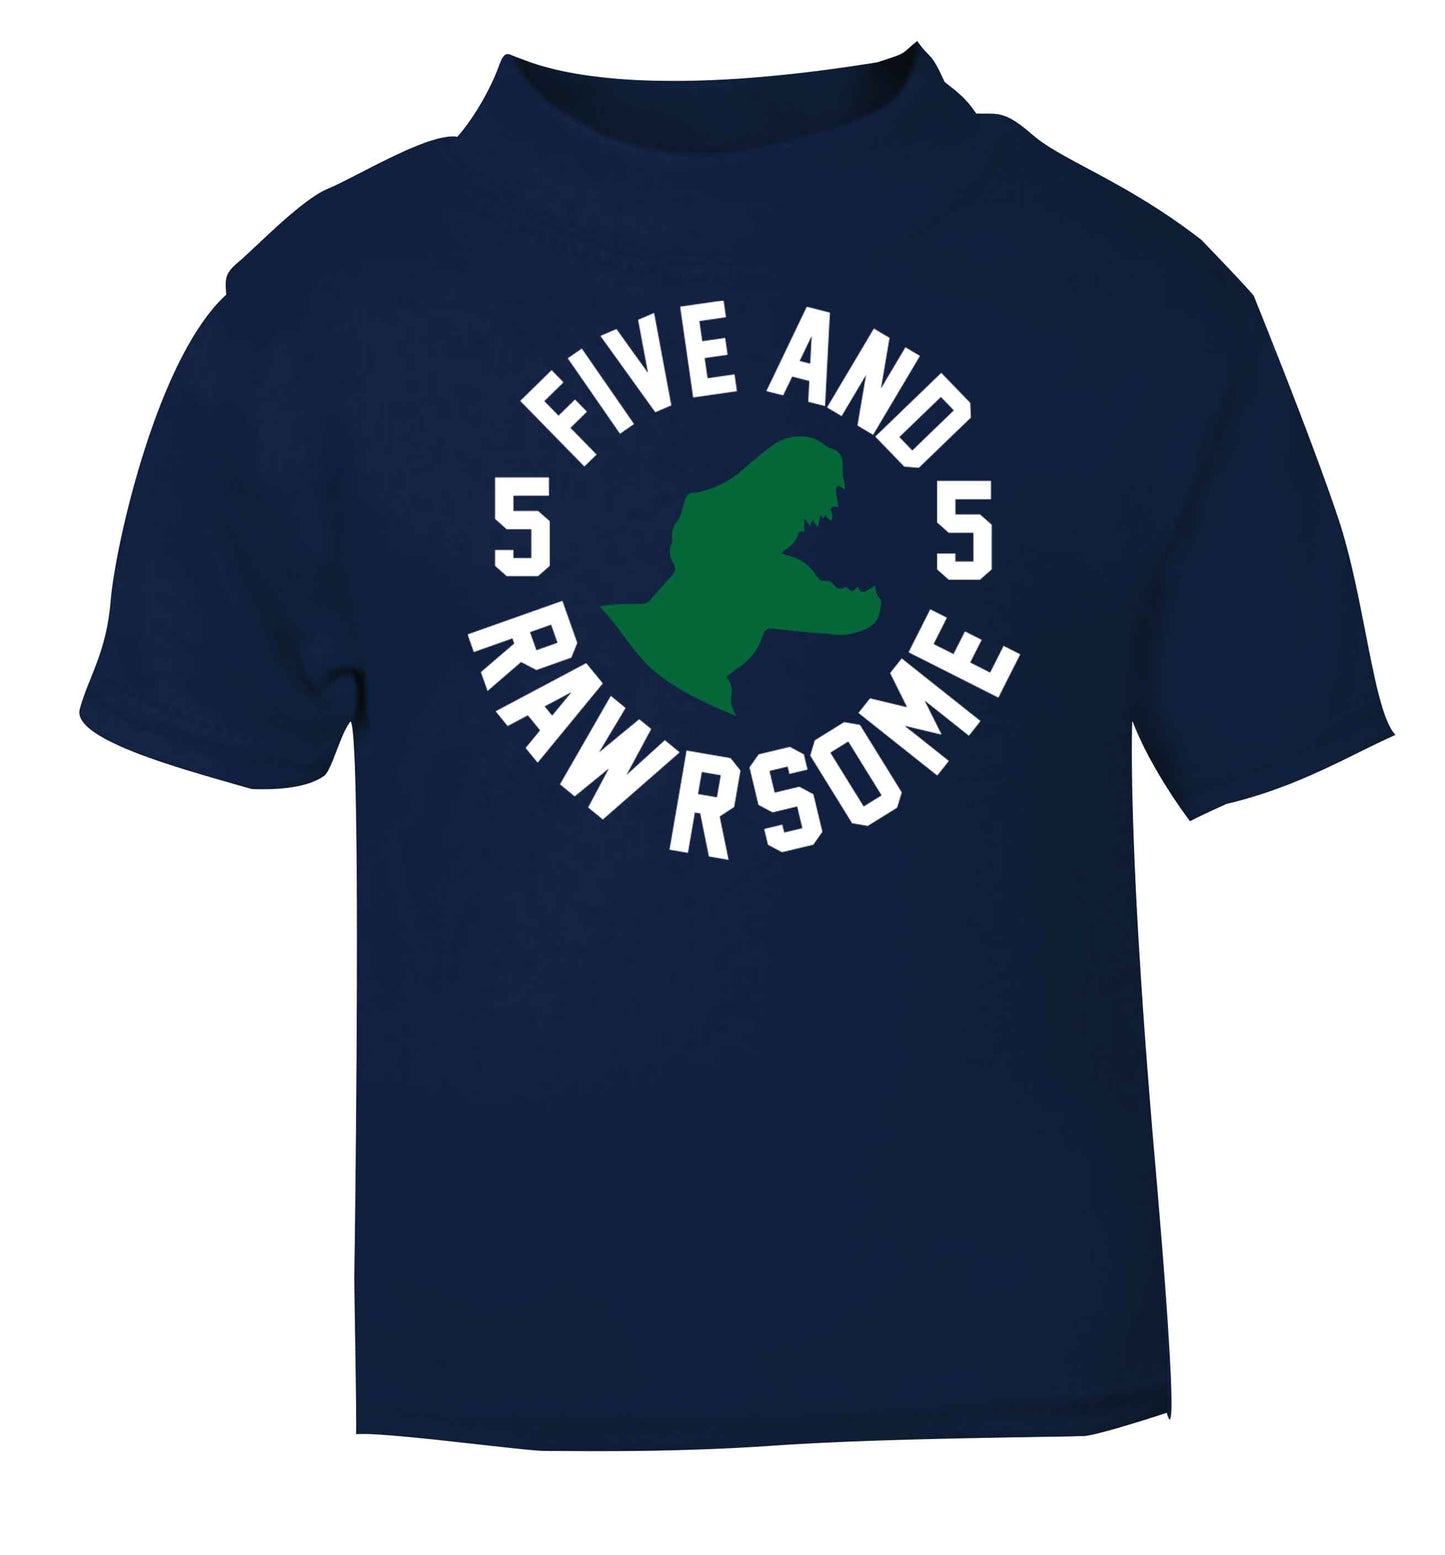 Five and rawrsome navy baby toddler Tshirt 2 Years